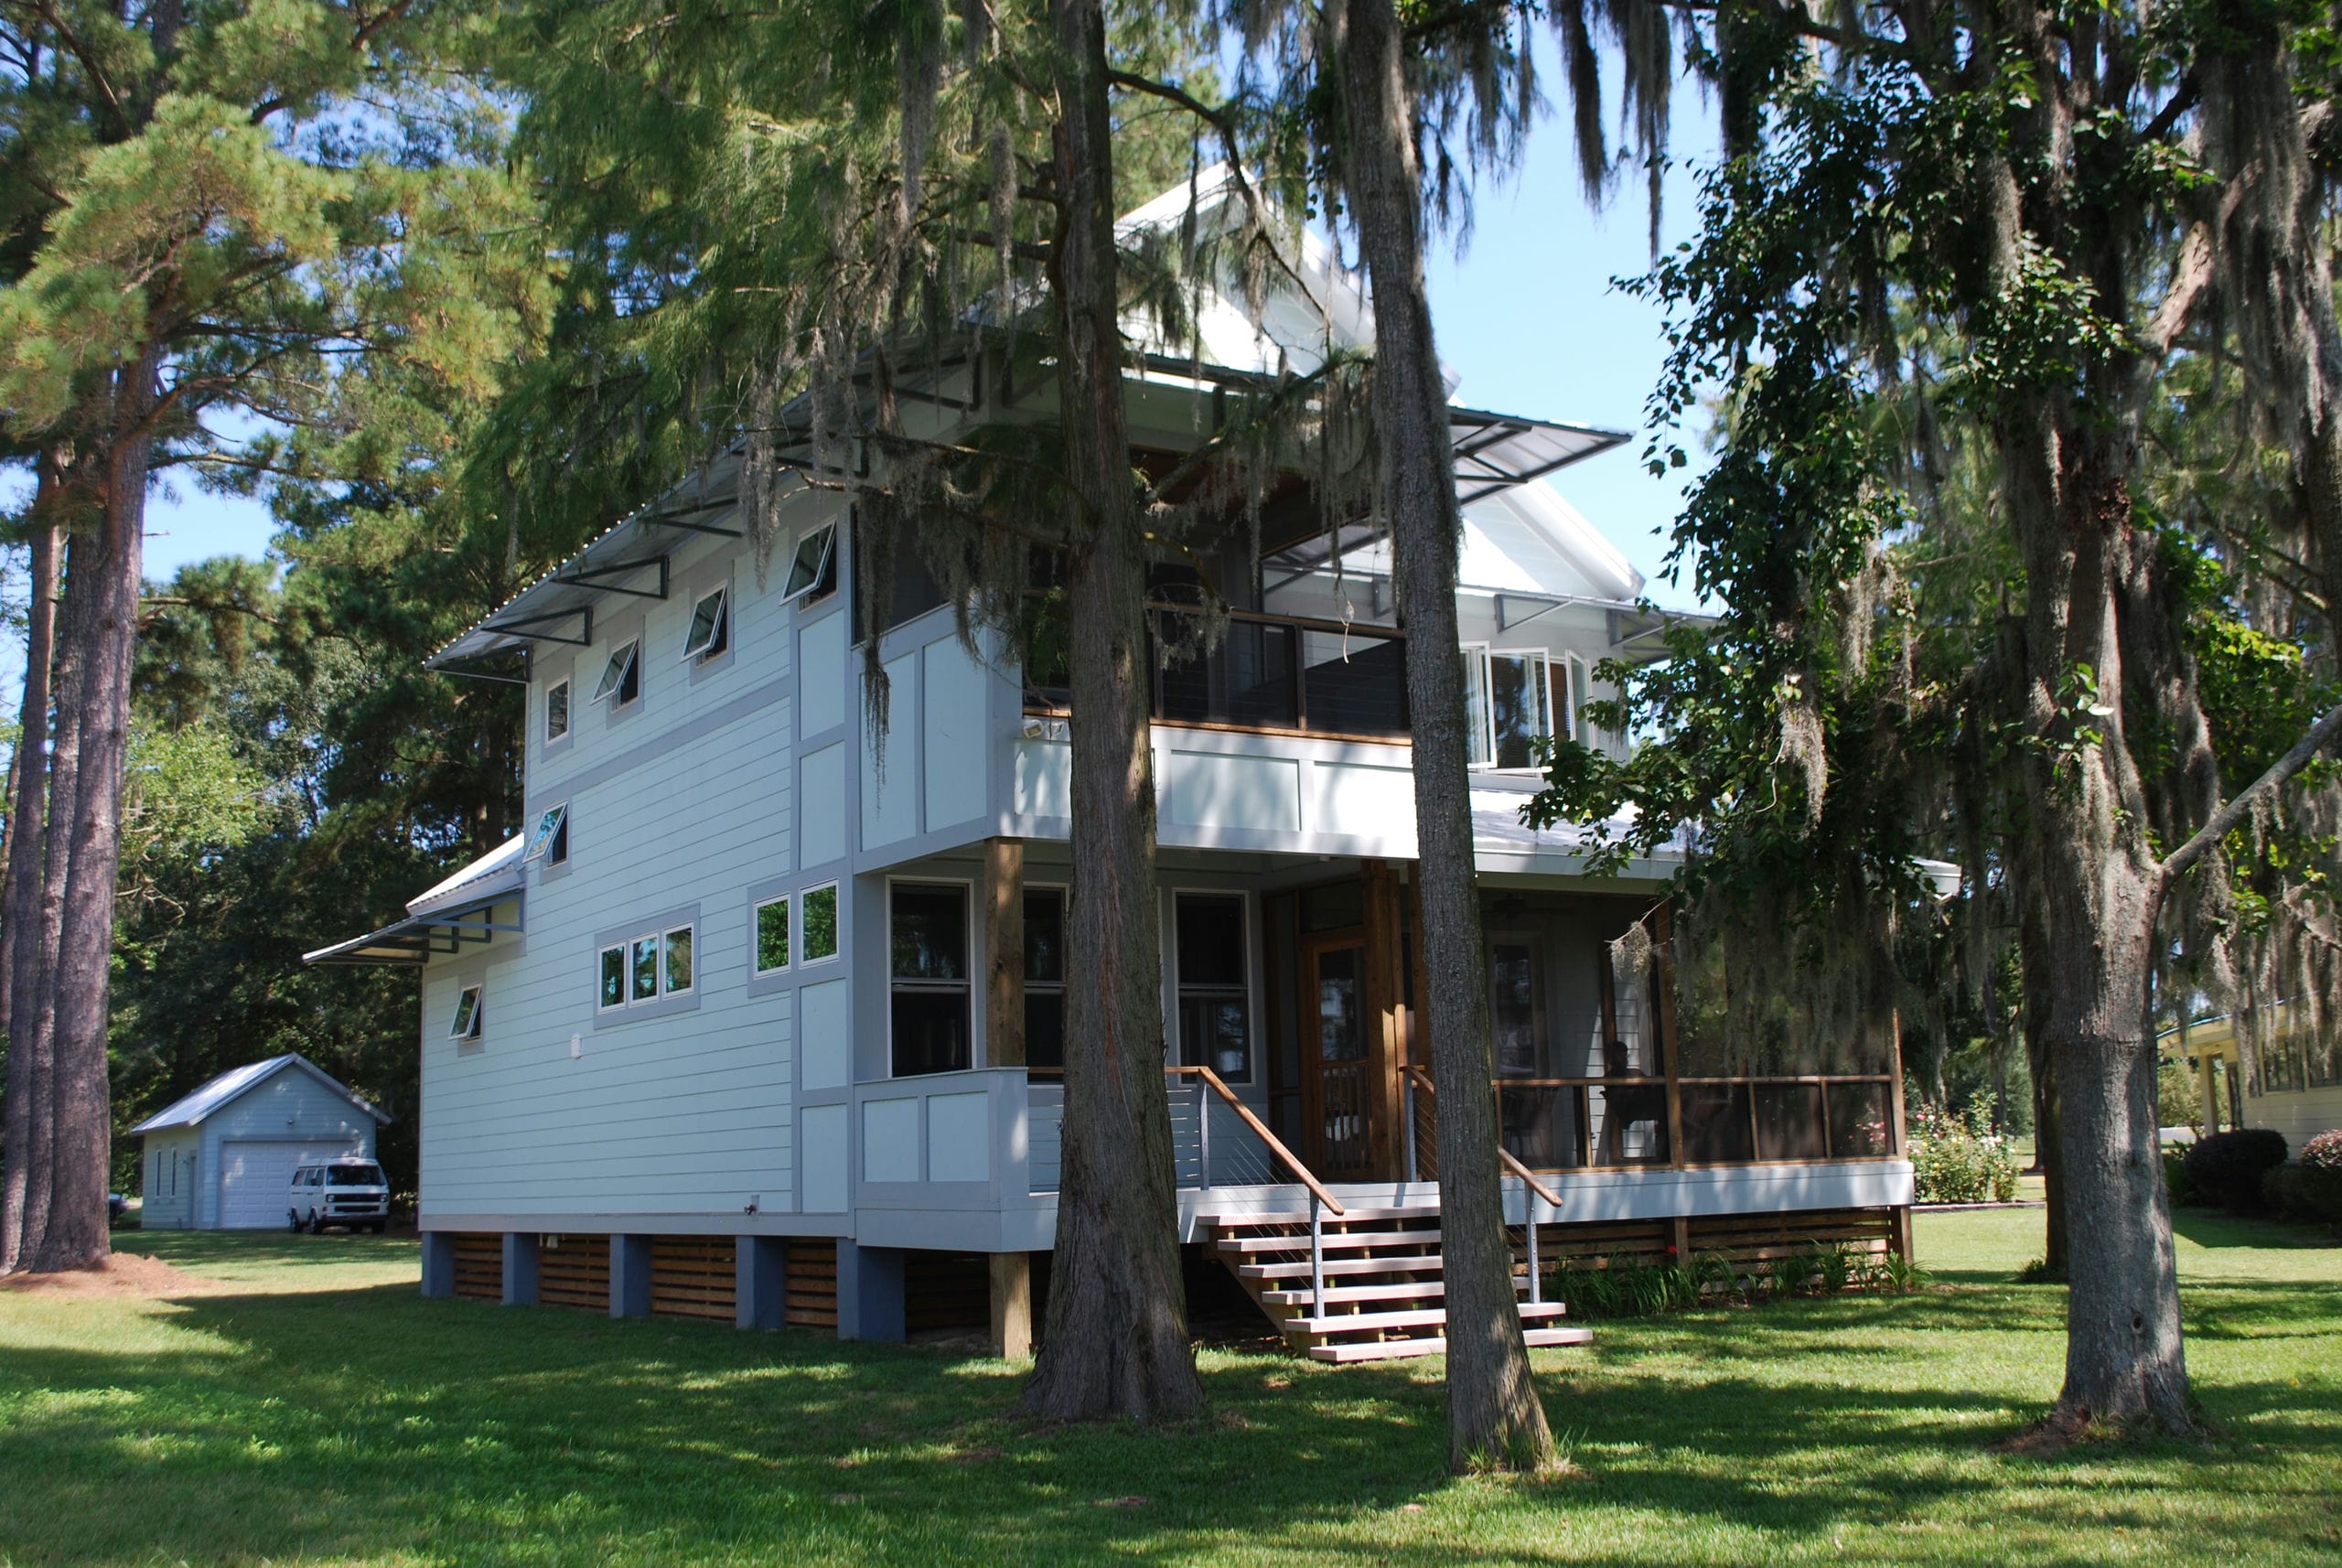 Modern coastal home with many porches shaded by trees covered in Spanish moss.